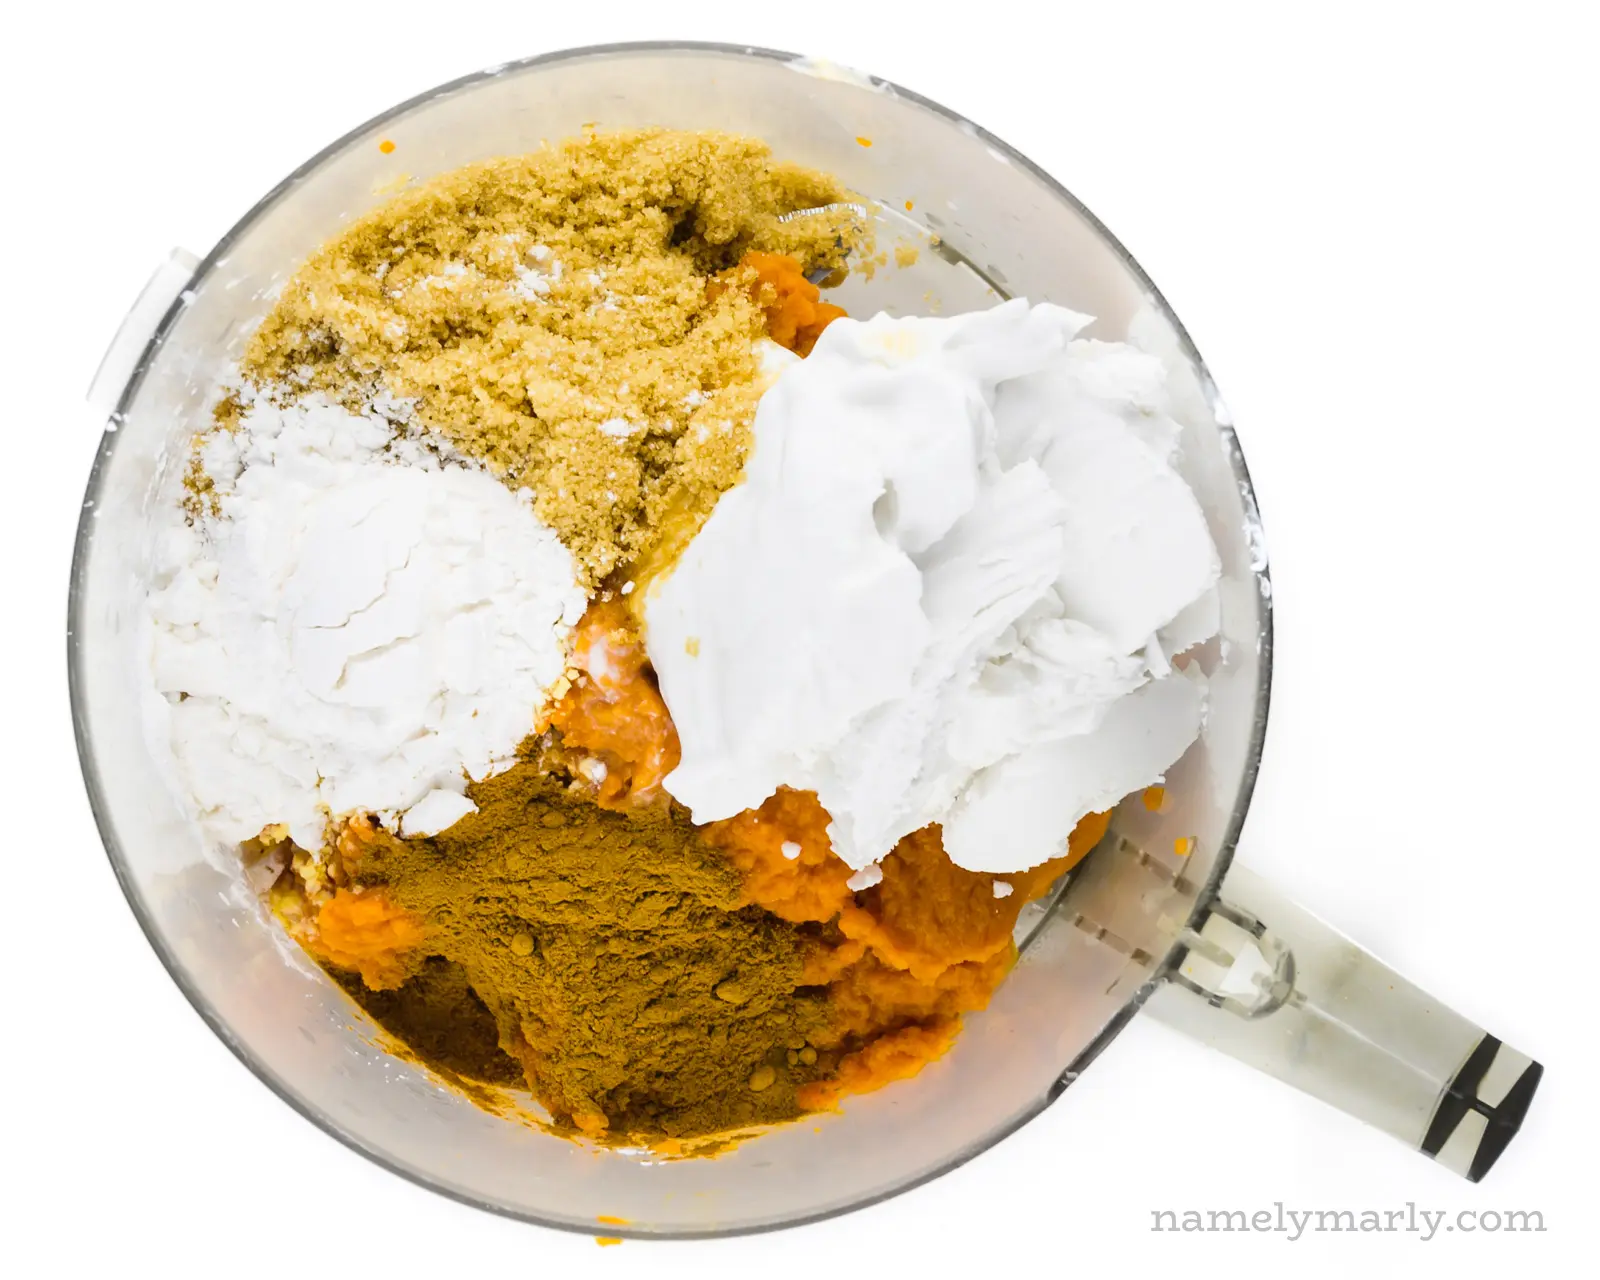 Ingredients like coconut milk, brown sugar, and spices are in a food processor bowl.